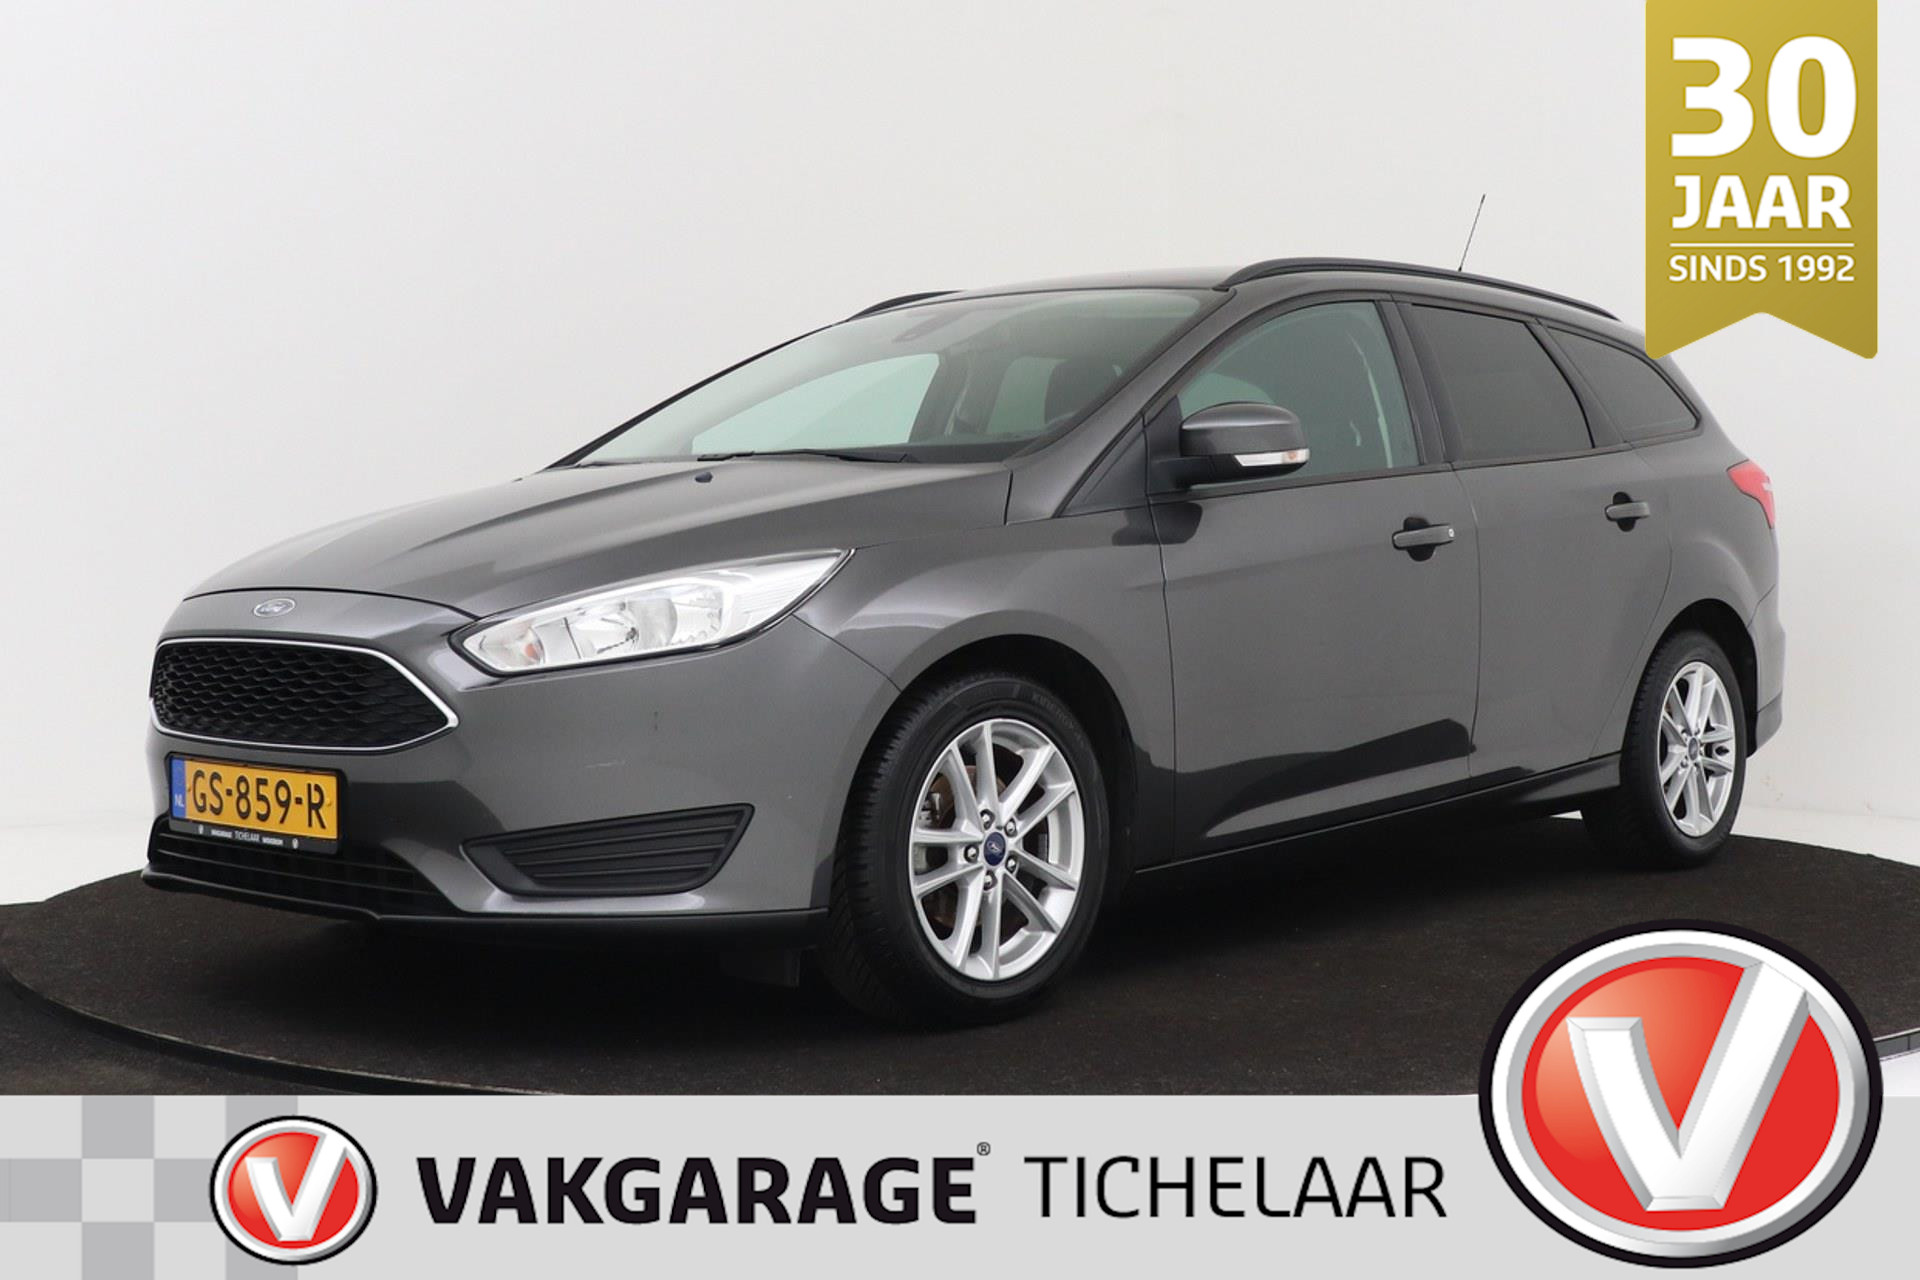 Ford Focus Wagon 1.0 Trend Edition | Org NL | Volledig Ond. | Airco | Cruise Control | bij viaBOVAG.nl